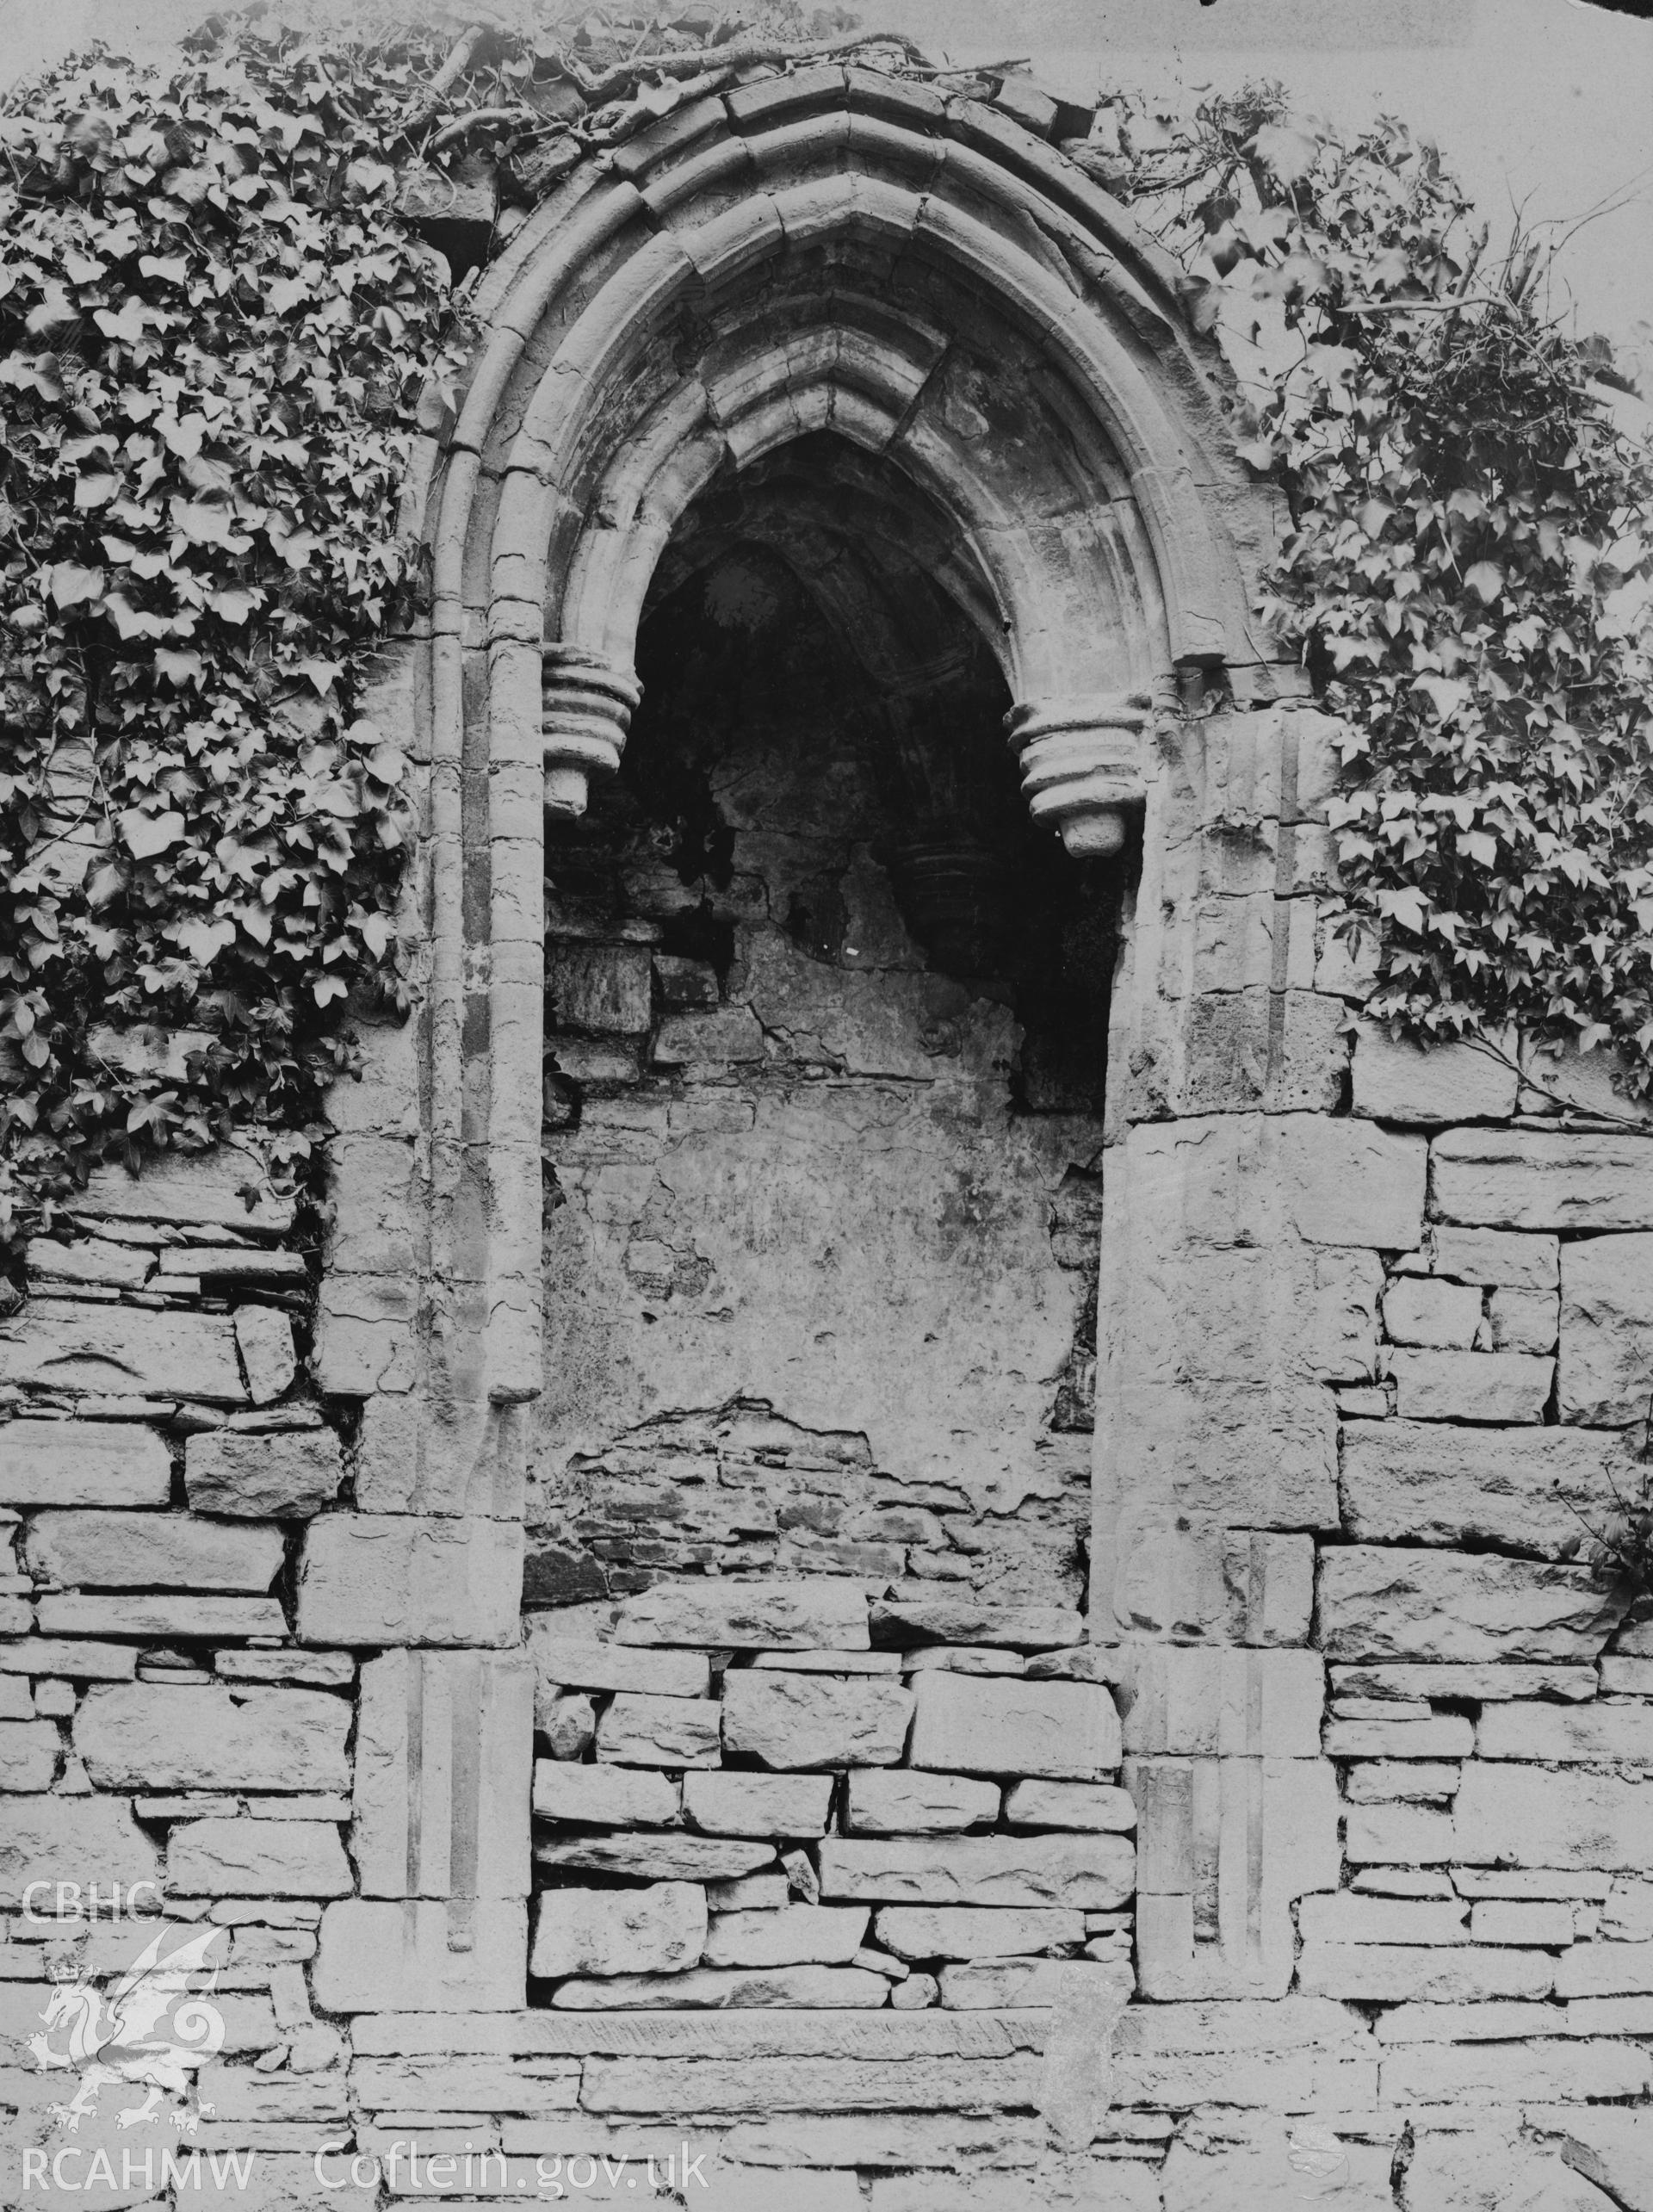 Digital copy of an early National Buildings Record photograph showing the reader's pulpit at Tintern Abbey.